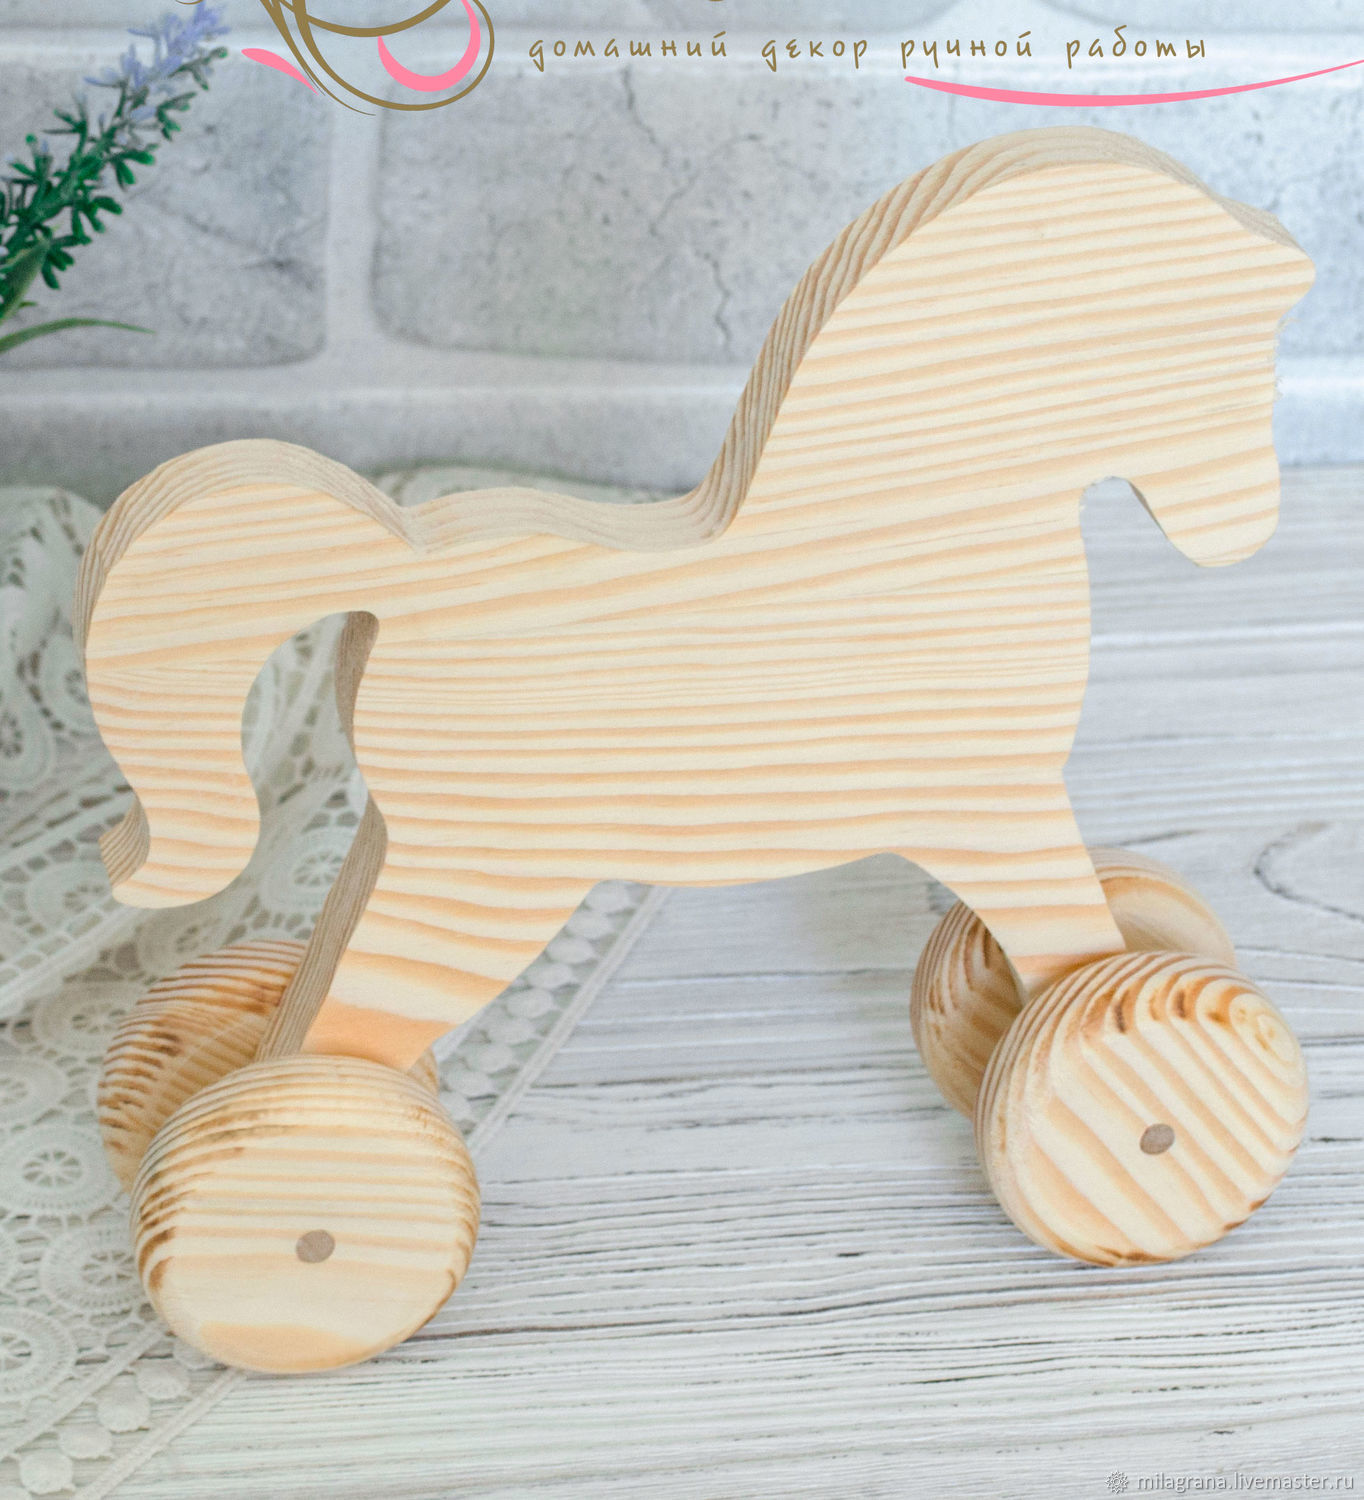 wooden toy duck on wheels